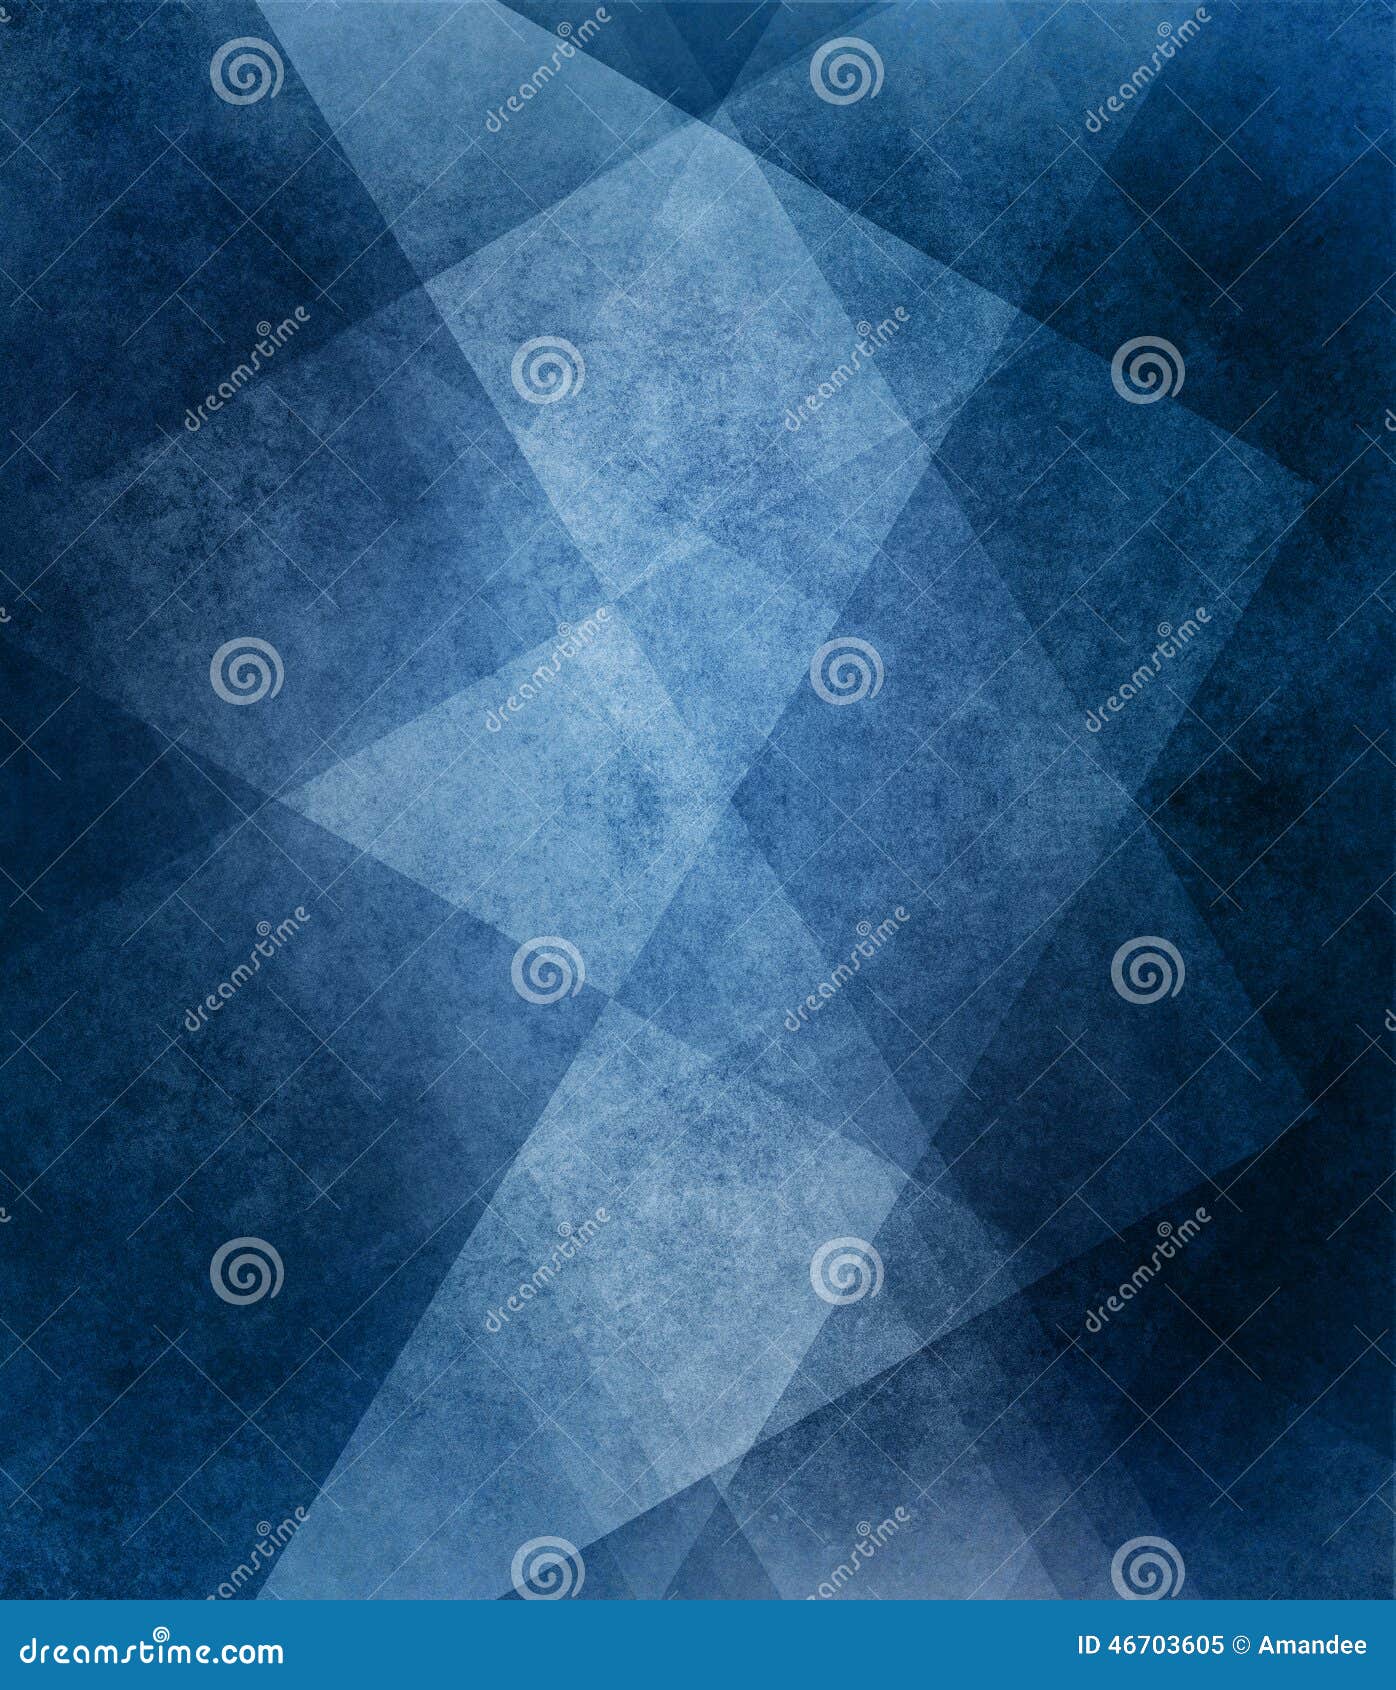 abstract blue background white striped pattern and blocks in diagonal lines with vintage blue texture